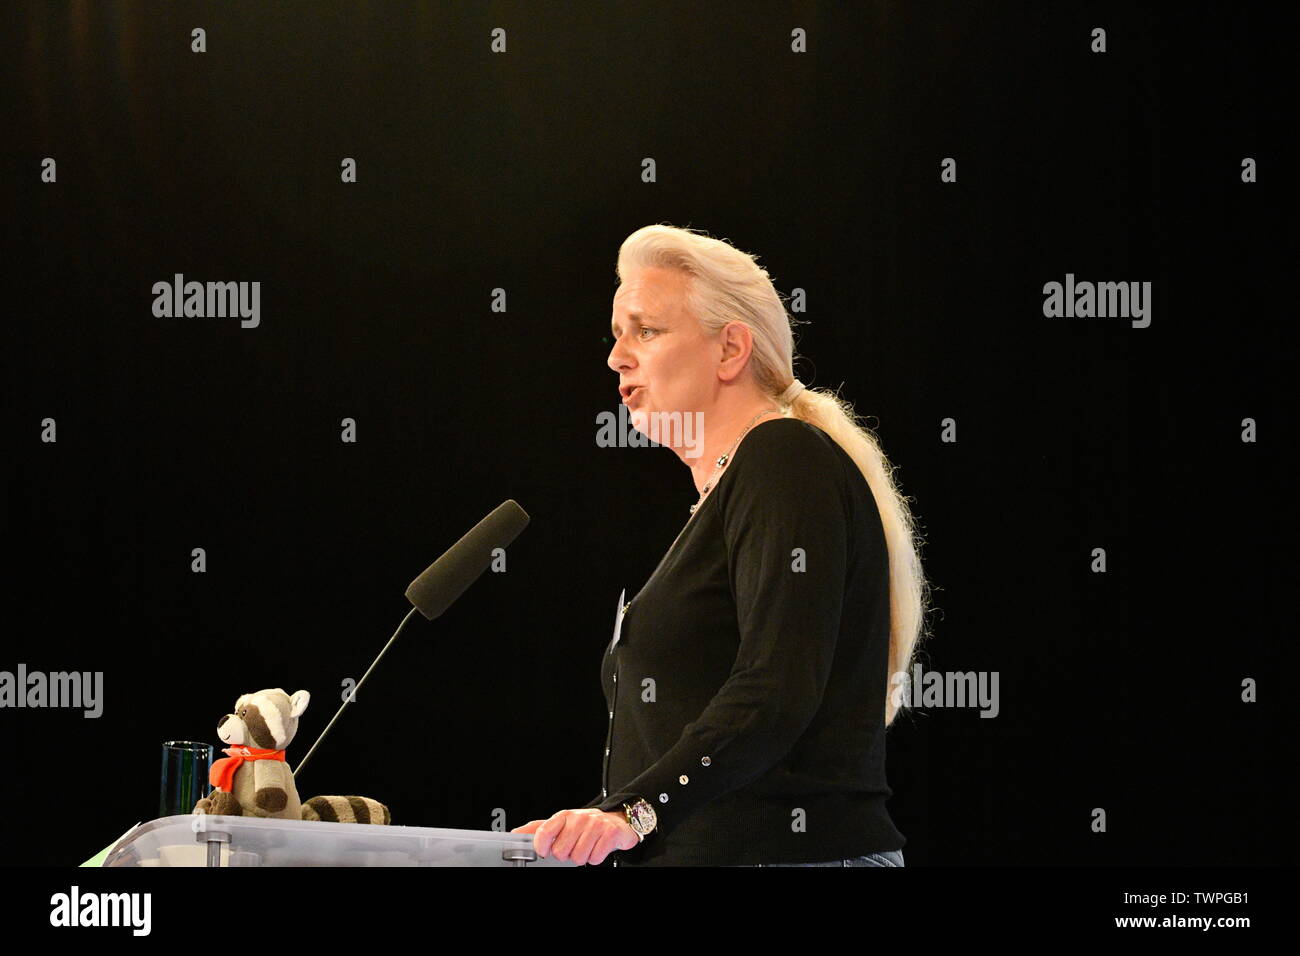 Vienna, Austria. 22st June, 2019. National Assembly of the Green Party Vienna. Election of the candidate list from the Green Party Vienna  for the National Council election on September 29, 2019. Daniela Kickl, applies for a list position for the National Council election.  Credit: Franz Perc/Alamy Live News Stock Photo